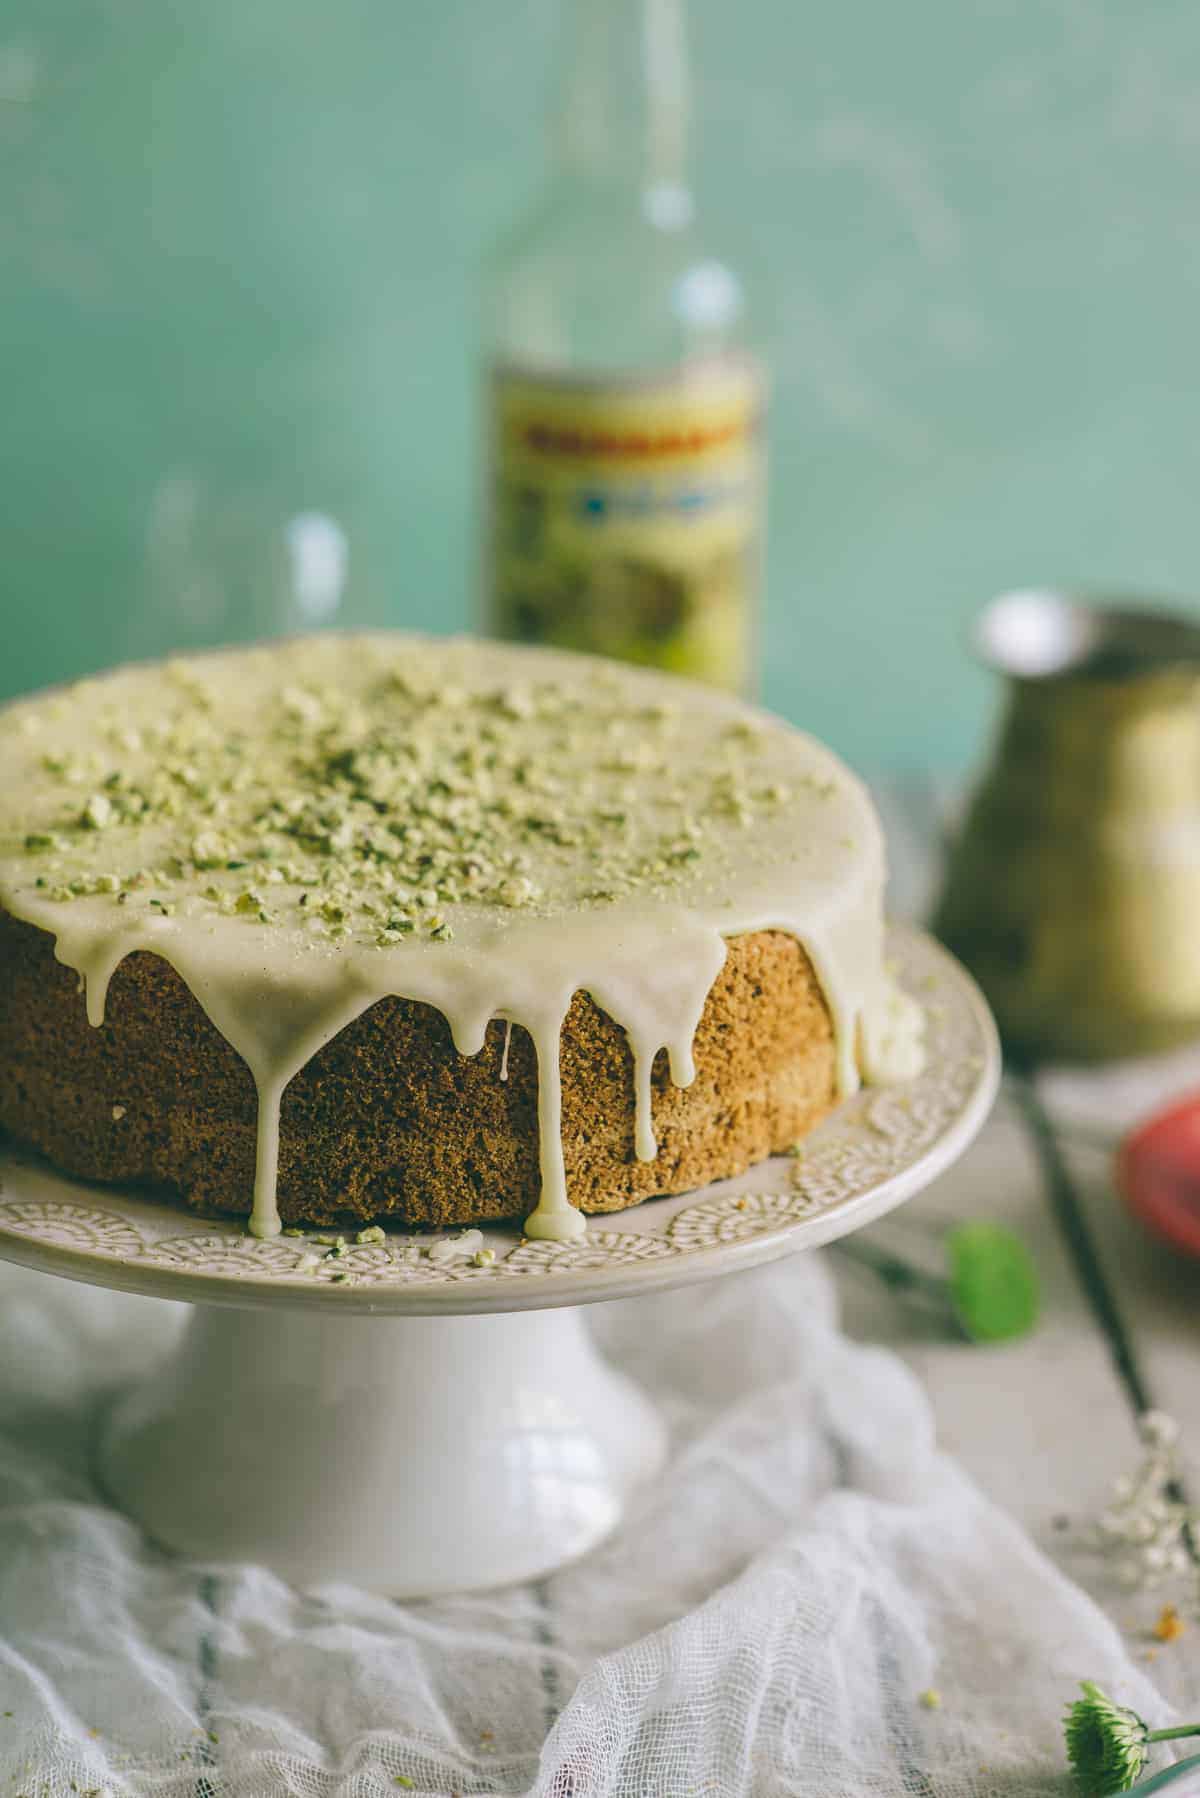 a cake flavoured with ouzo and pistachios. It is covered in a thick orange flavoured icing